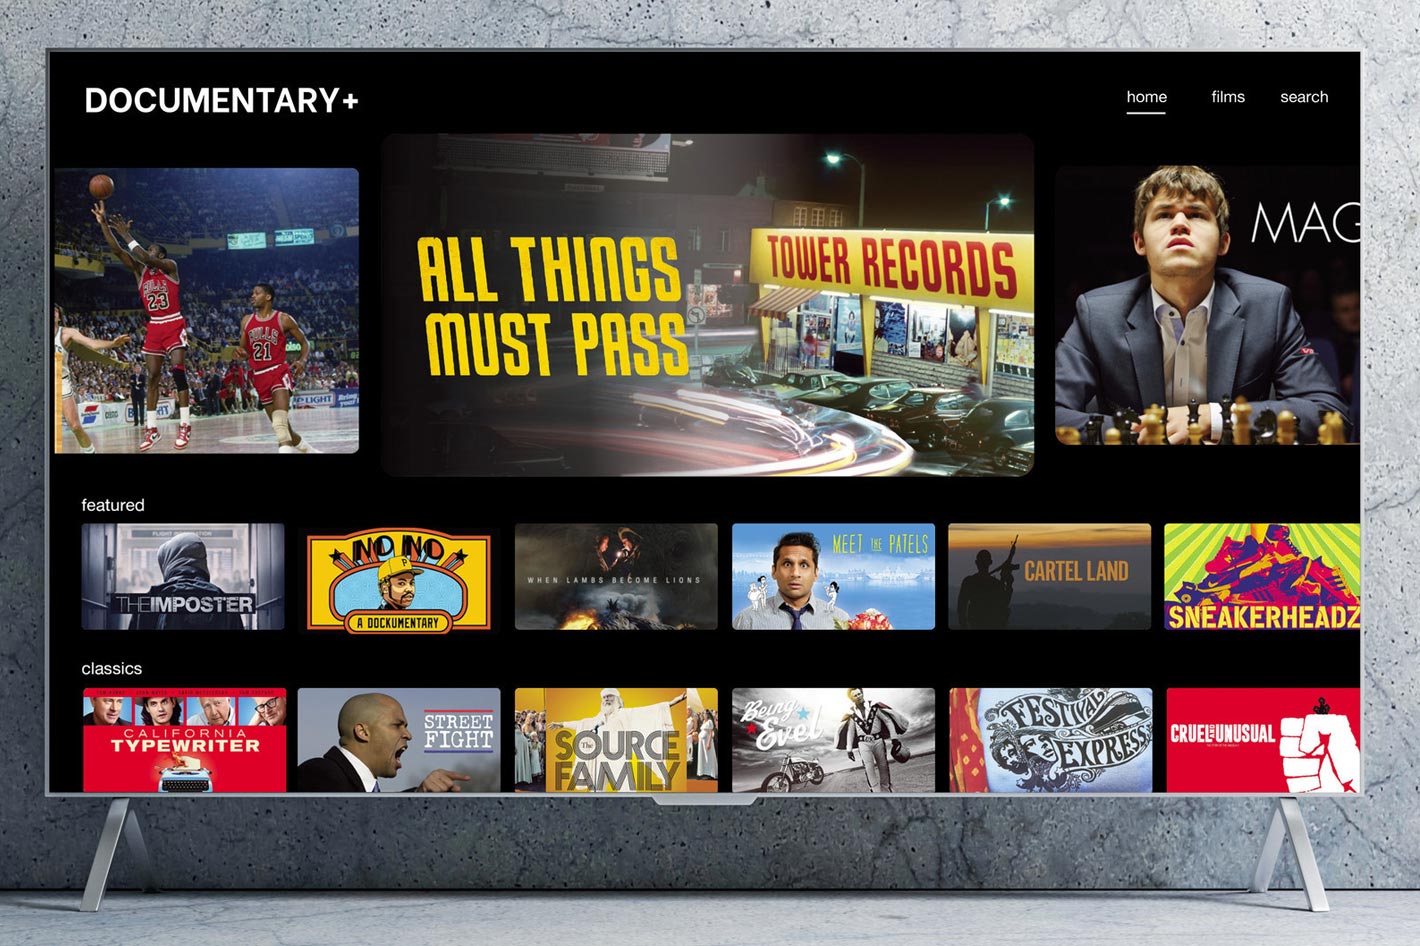 Documentary+: a new and free nonfiction streaming platform